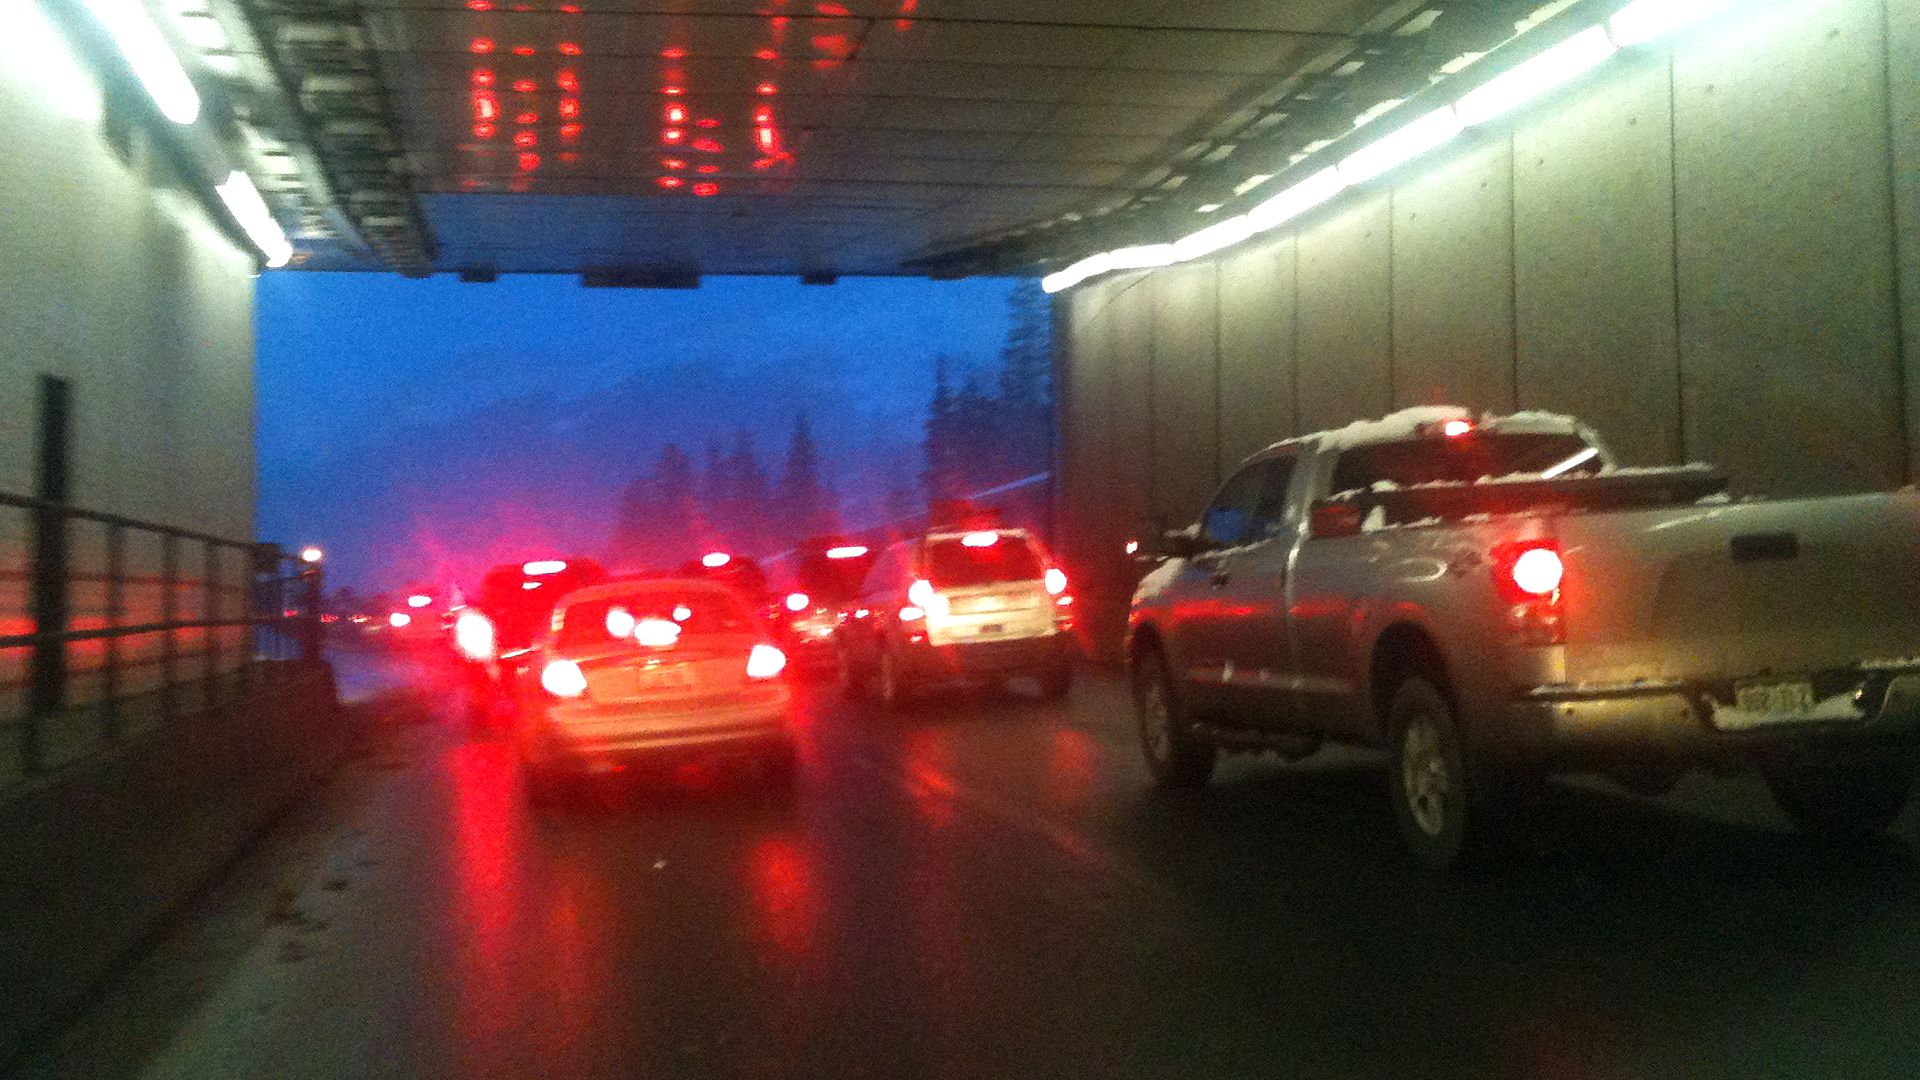 Eastbound I-70 traffic in the Eisenhower Tunnel. Photo: Cyrus McCrimmon/The Denver Post via Getty Images